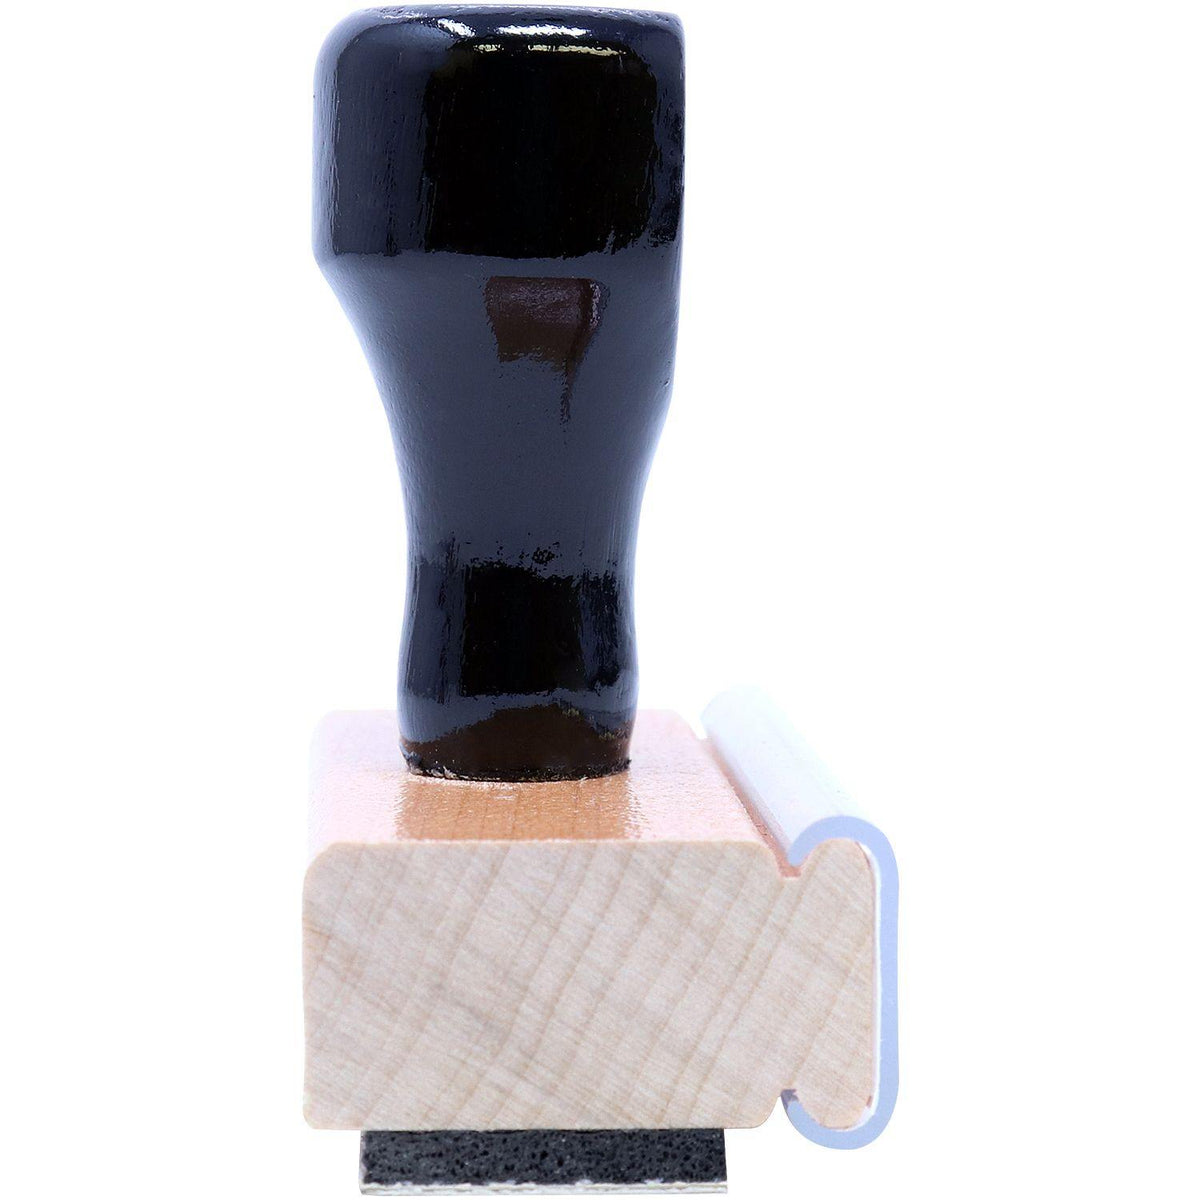 Large Social Distancing Rubber Stamp - Engineer Seal Stamps - Brand_Acorn, Impression Size_Large, Stamp Type_Regular Stamp, Type of Use_General, Type of Use_Medical Office